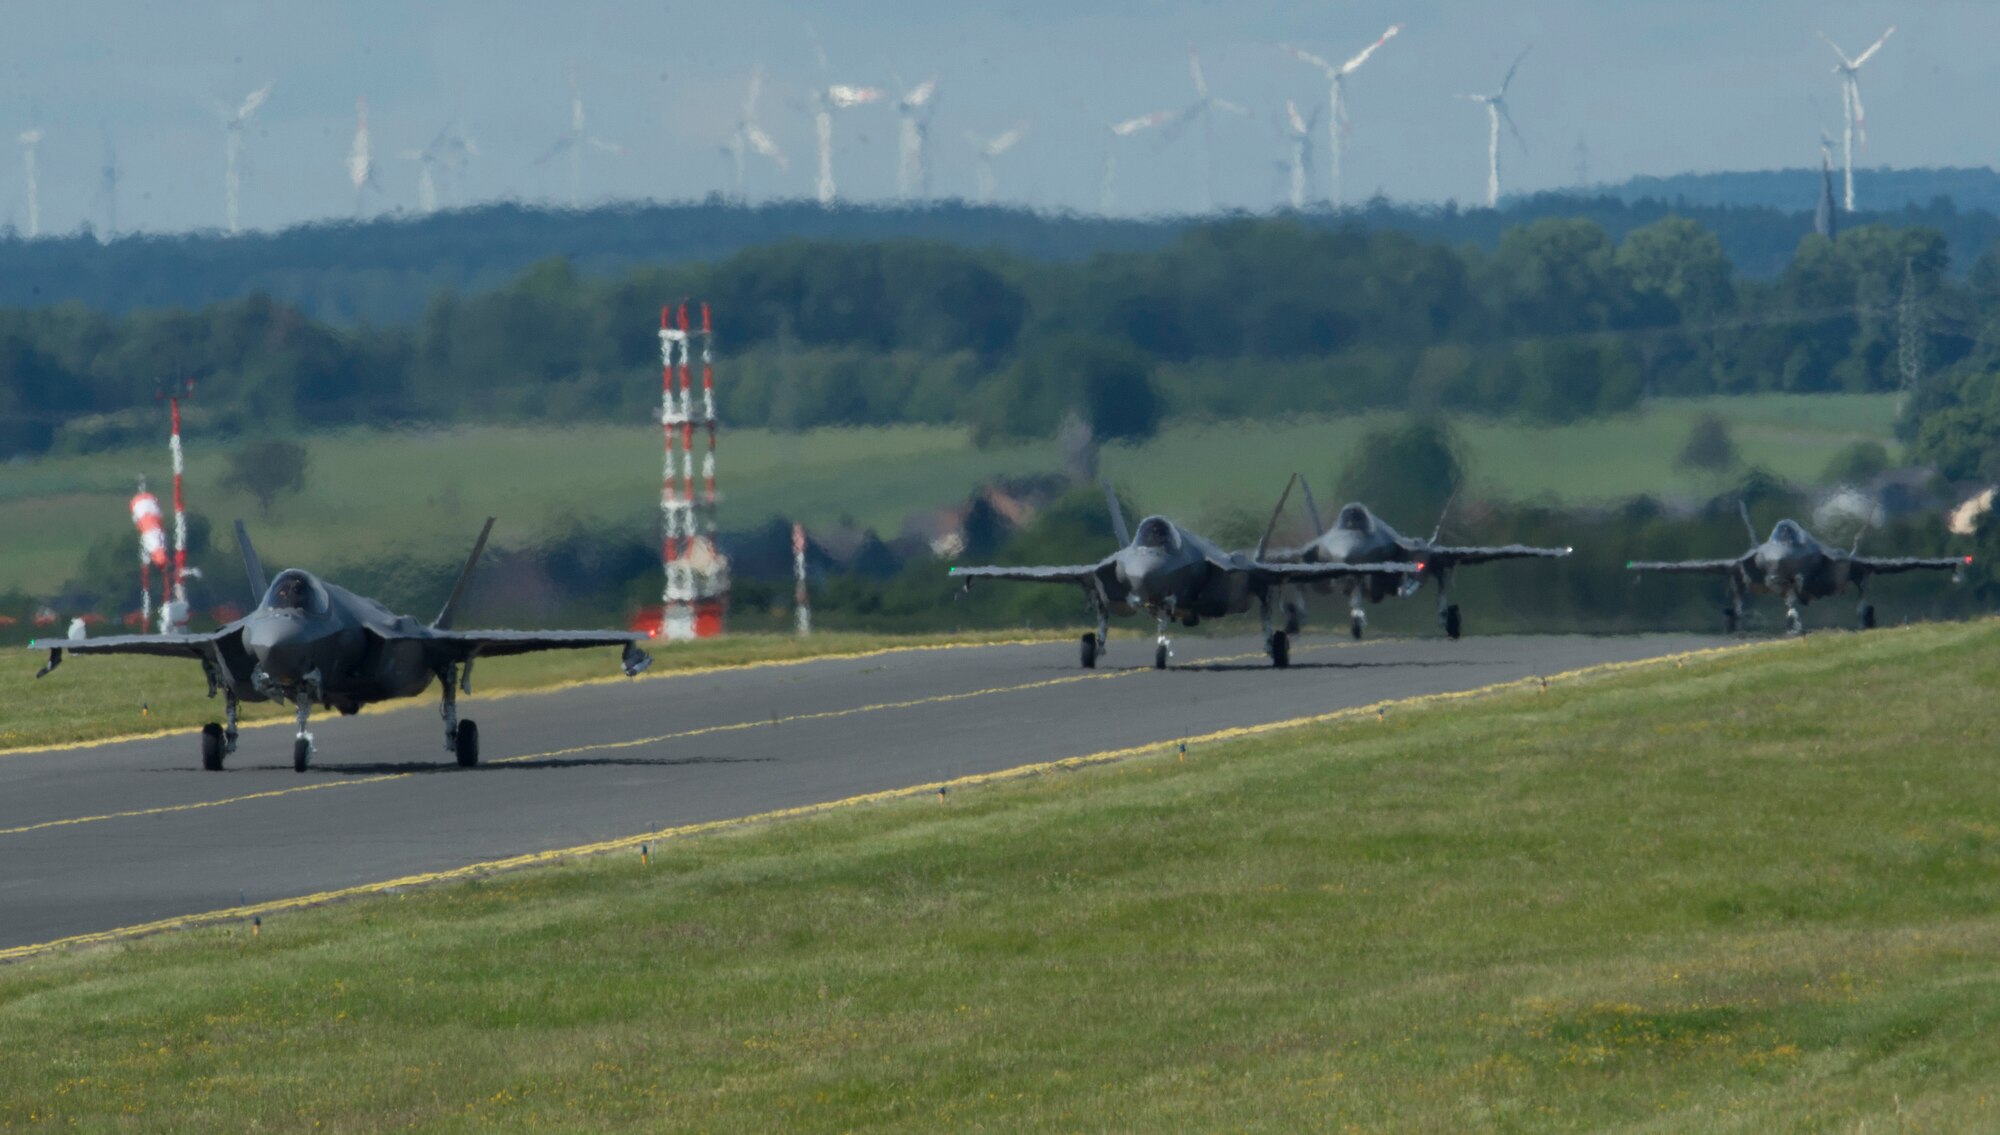 U.S. Air Force F-35A Lightning II fighter aircraft, assigned to the 421st Fighter Squadron, Hill Air Force Base, Utah, arrive at Spangdahlem Air Base, Germany, June 11, 2019. The Theater Security Package will assure allies, deter adversaries, and further demonstrate commitment to regional security. (U.S. Air Force photo by Airman 1st Class Jovante Johnson)